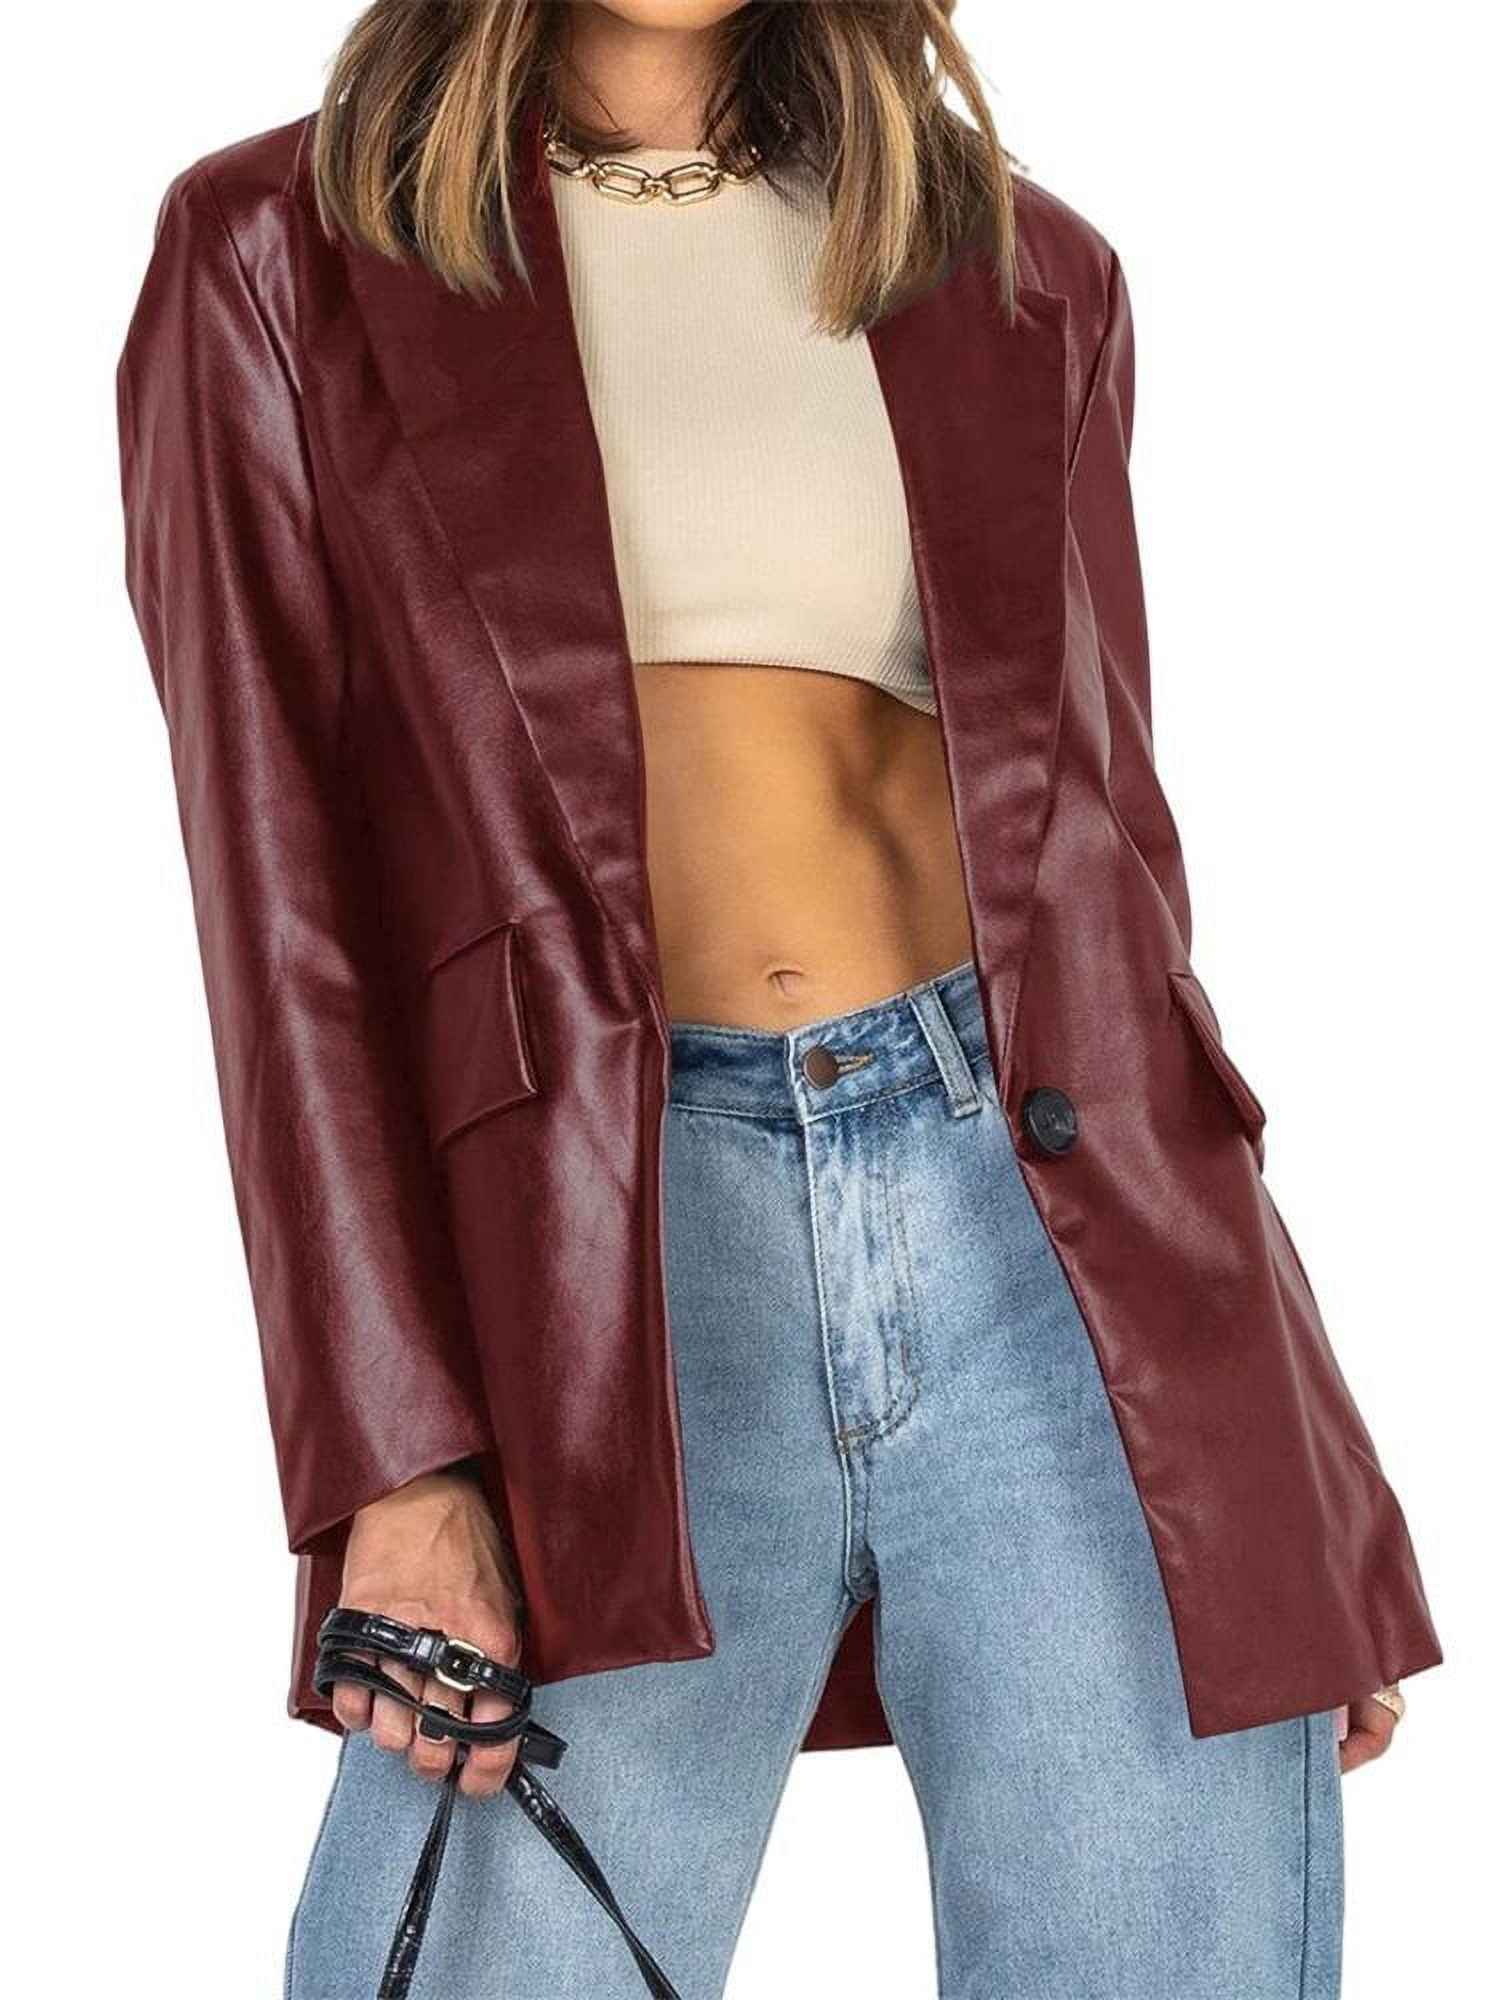 Long Sleeve Pu Jacket Turn-Down Collar Casual Faux-Leather Button Coat ...